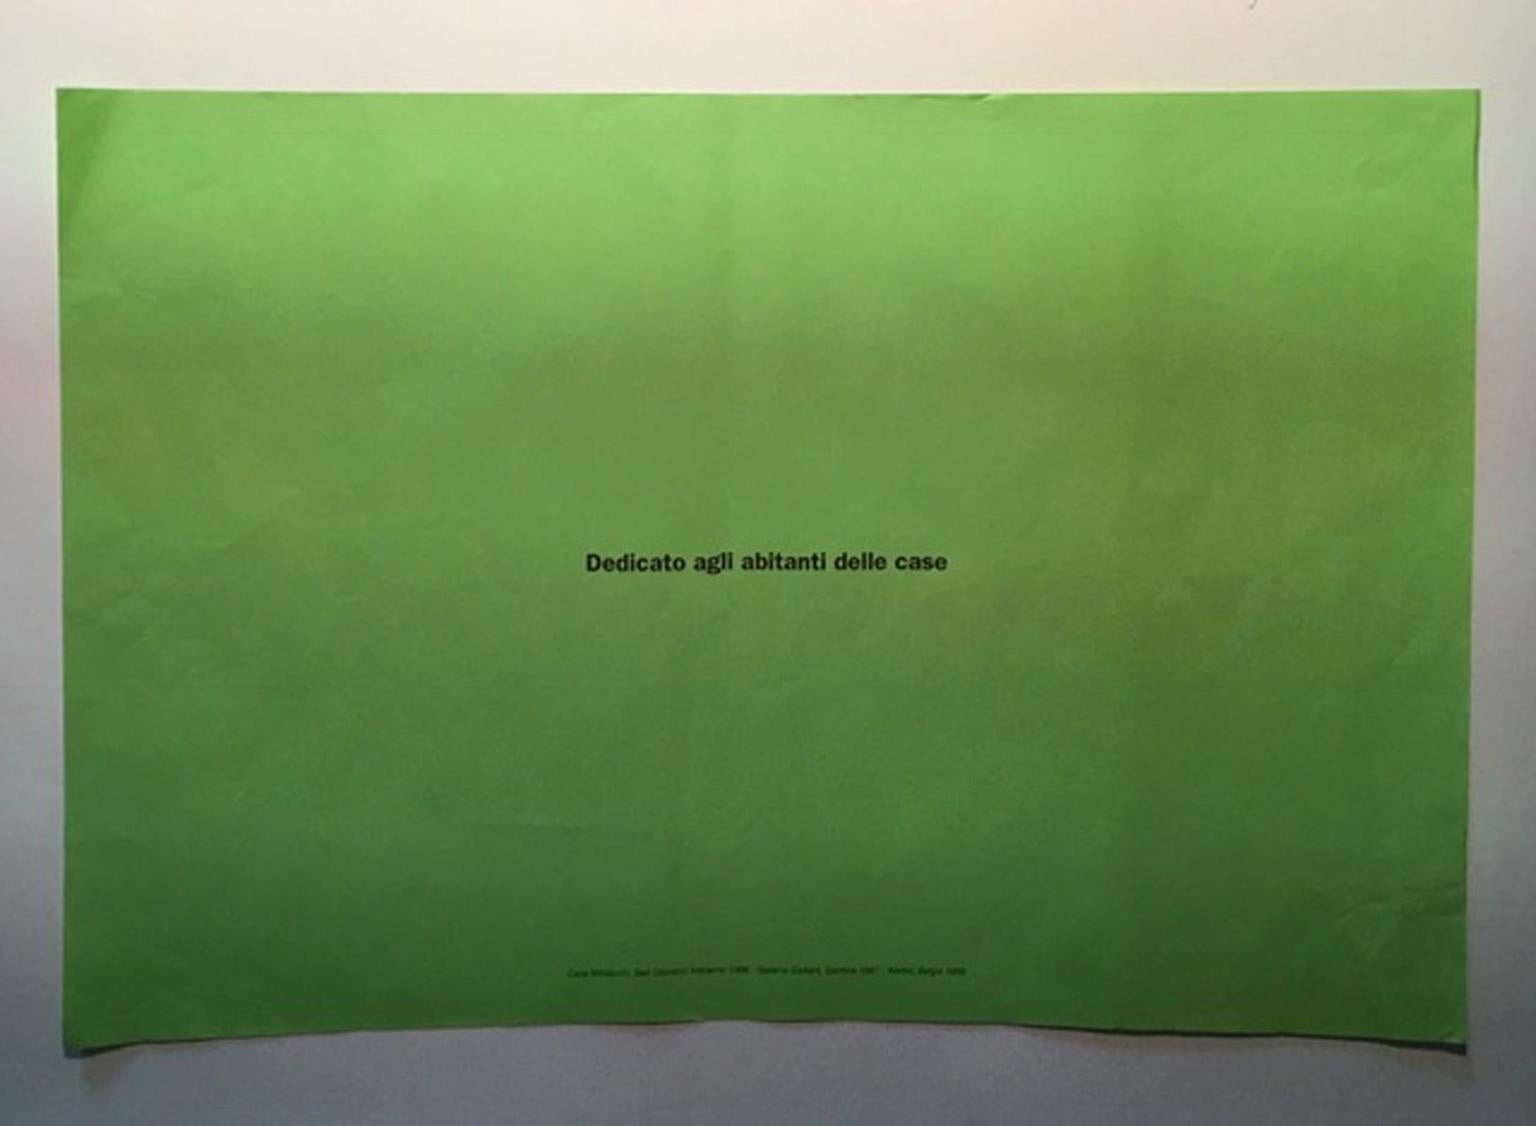 Ettore Spalletti Abstract Print - Post it Green, Multiple Black Print on Green Paper 2013 Triennale Milano Italy